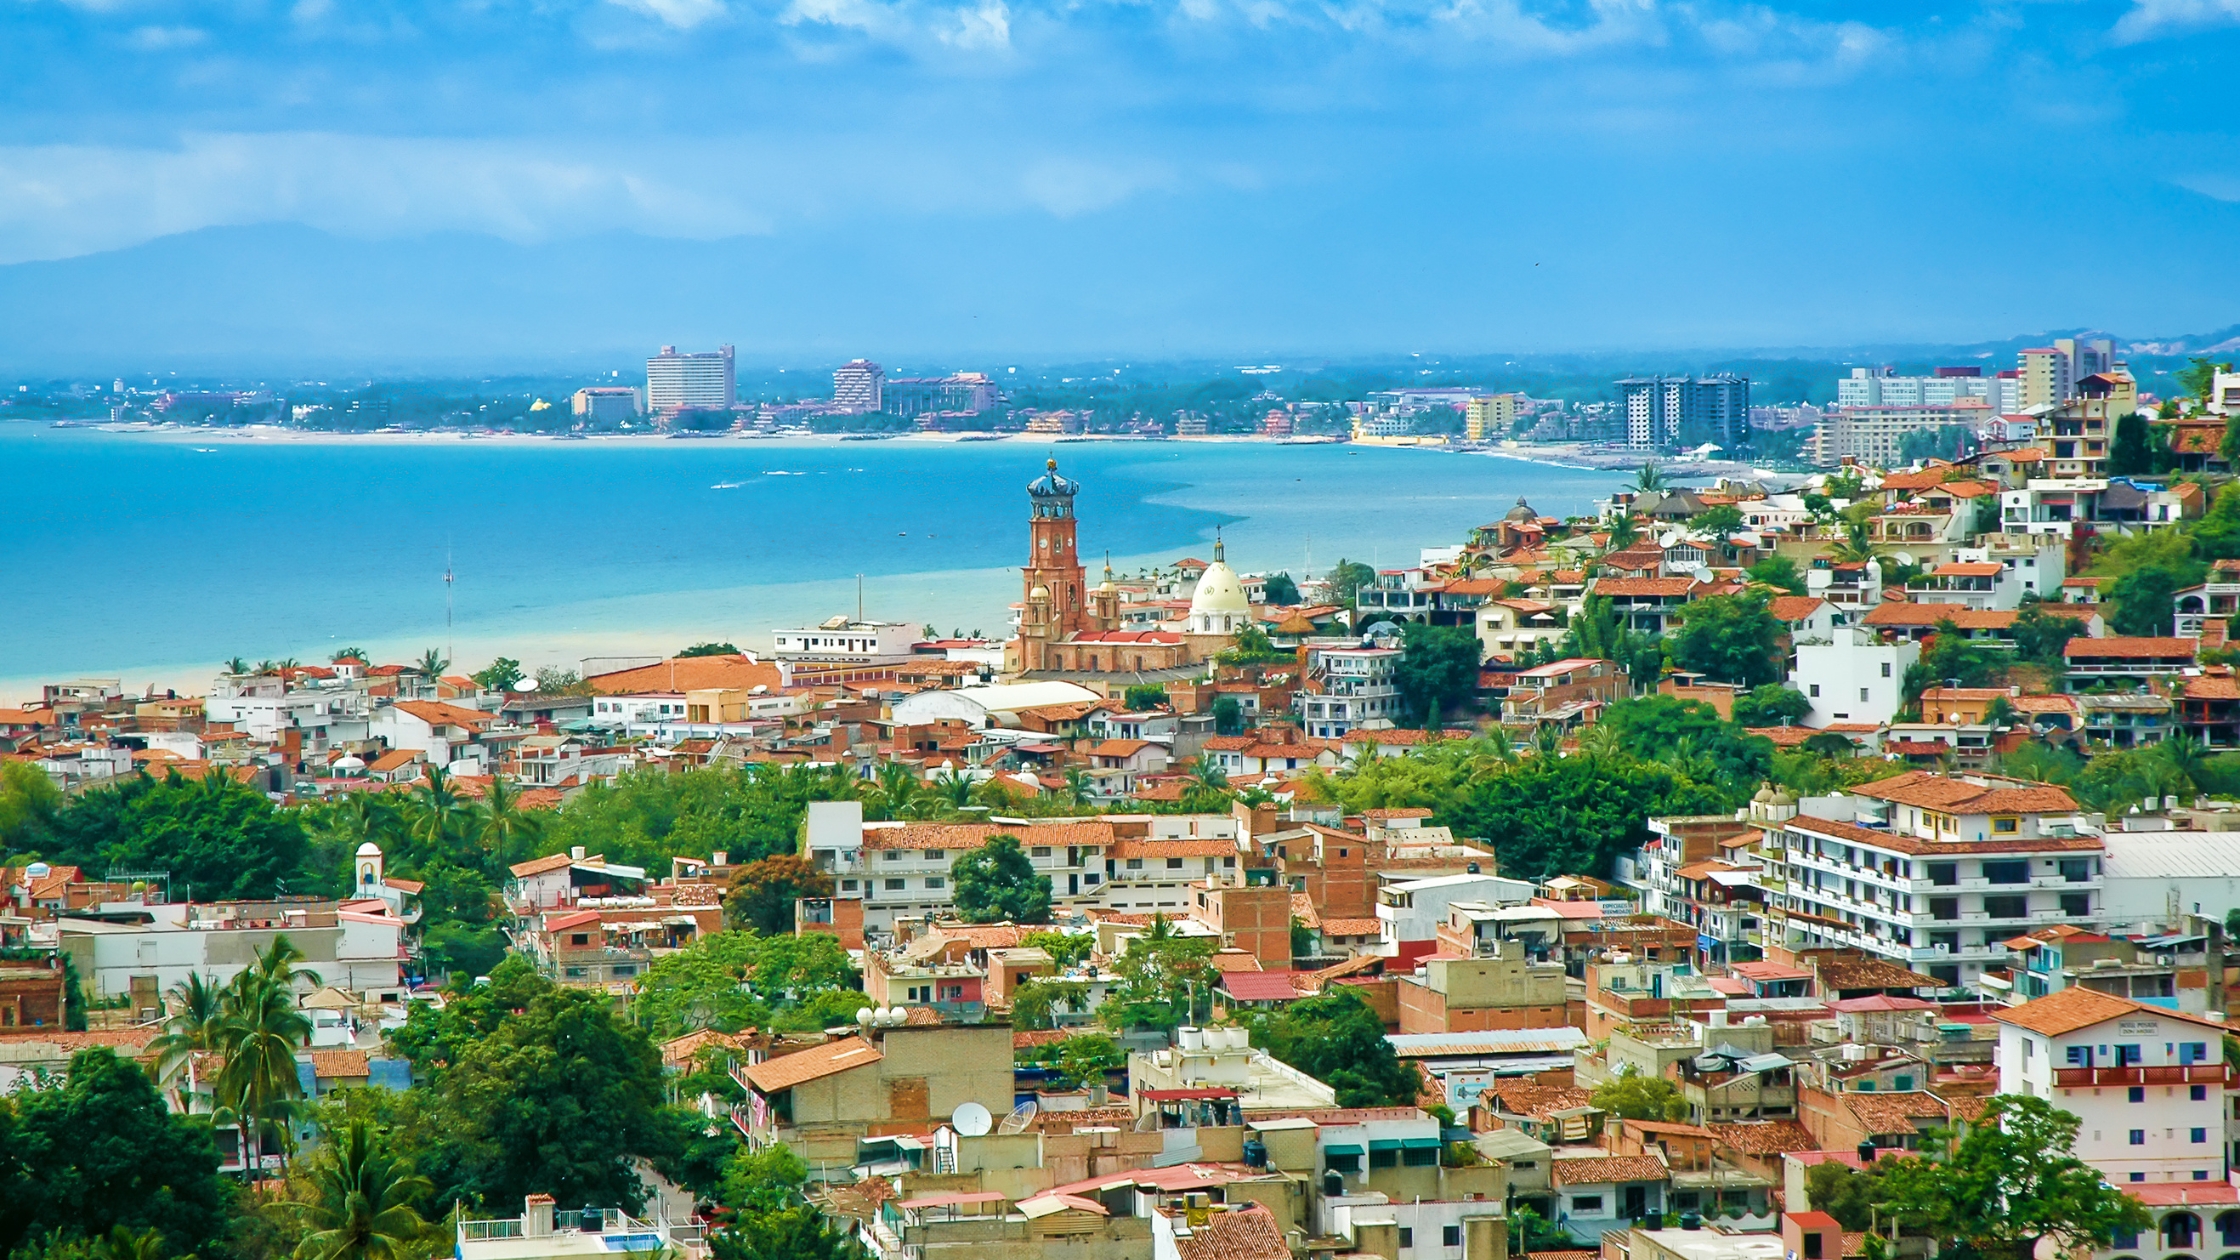 Into the Heart of Mexico: An Expat’s Guide to a New Life Abroad